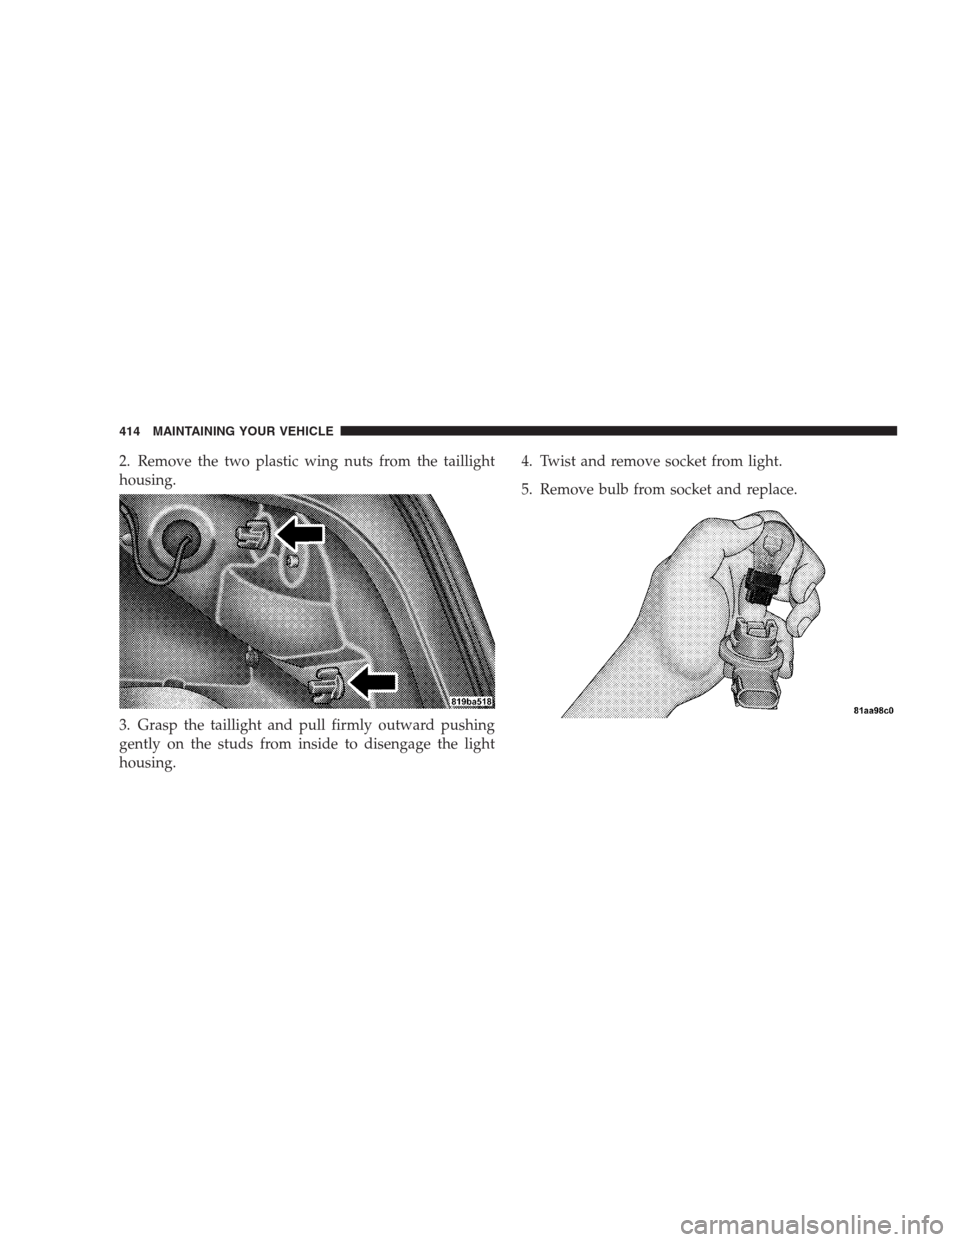 DODGE AVENGER 2009 2.G User Guide 2. Remove the two plastic wing nuts from the taillight
housing.
3. Grasp the taillight and pull firmly outward pushing
gently on the studs from inside to disengage the light
housing.4. Twist and remov